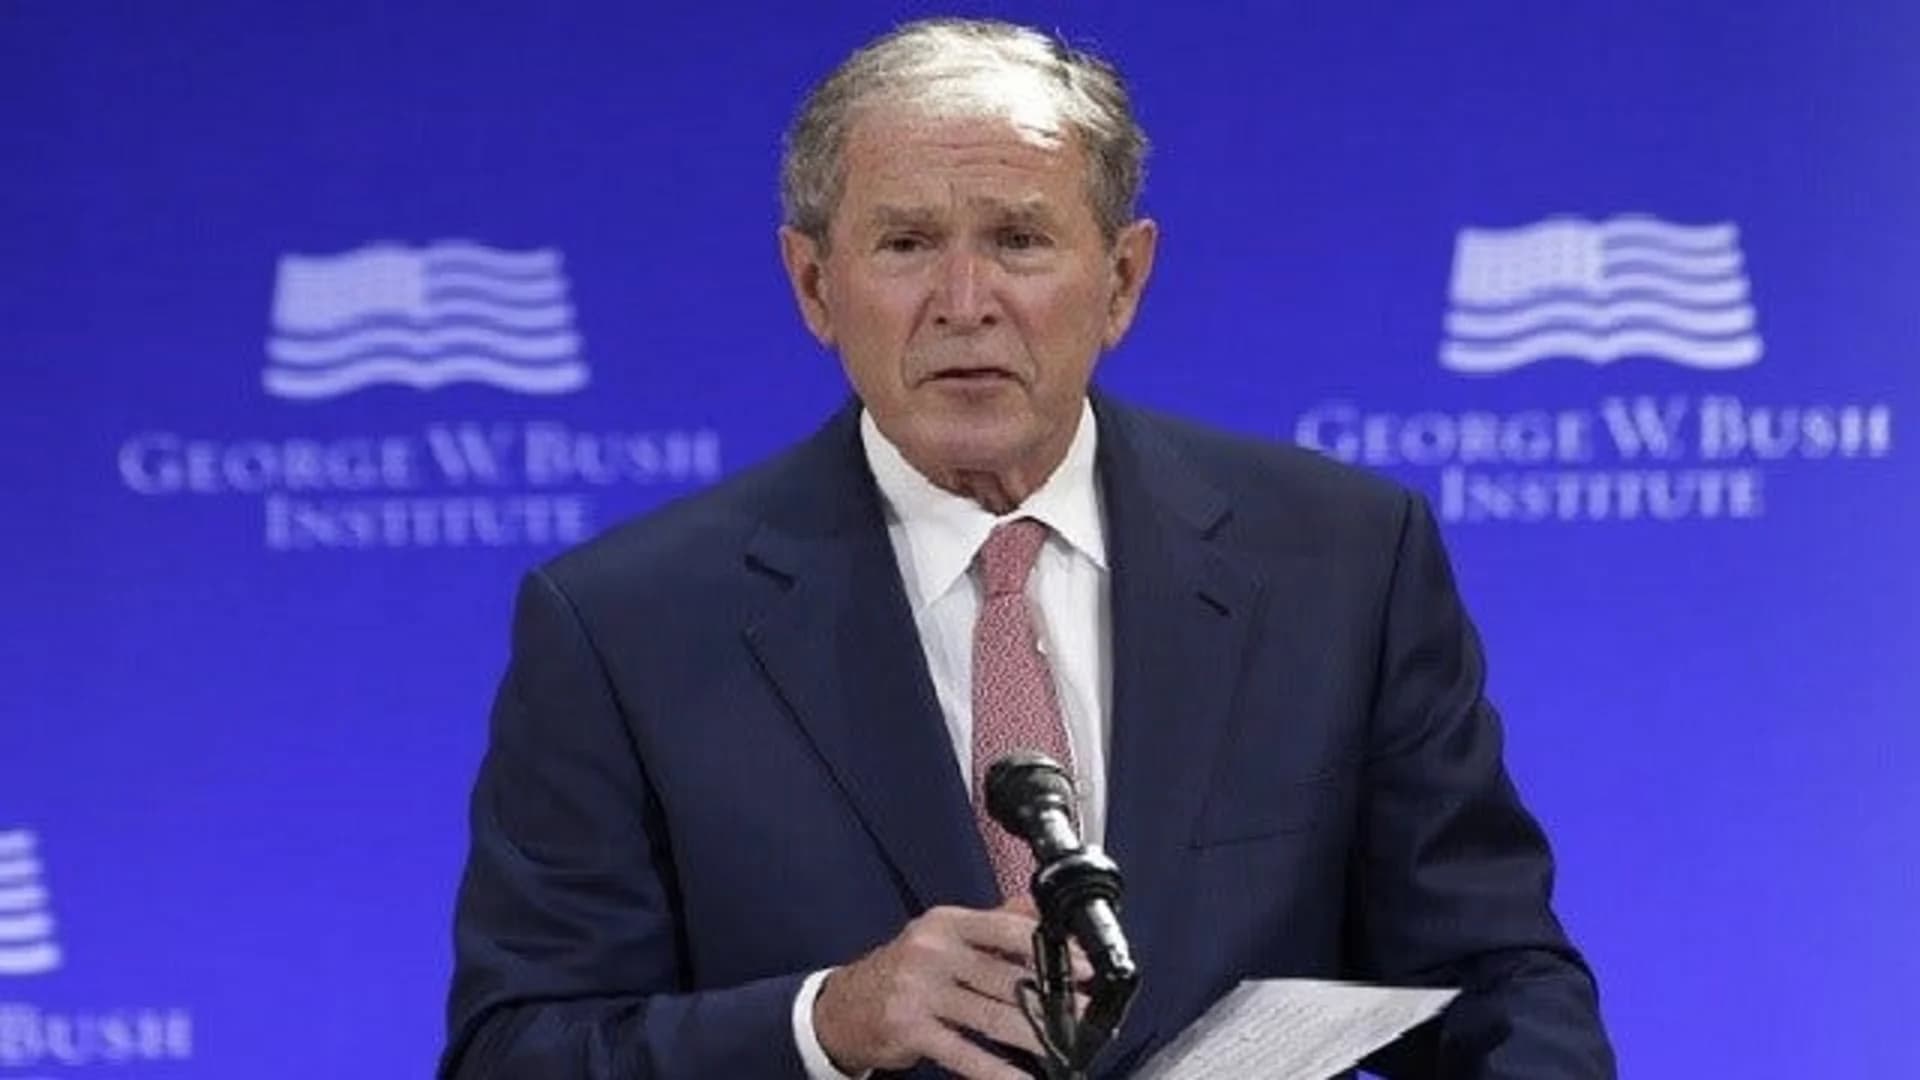 George W. Bush says Russia meddled in 2016 US election